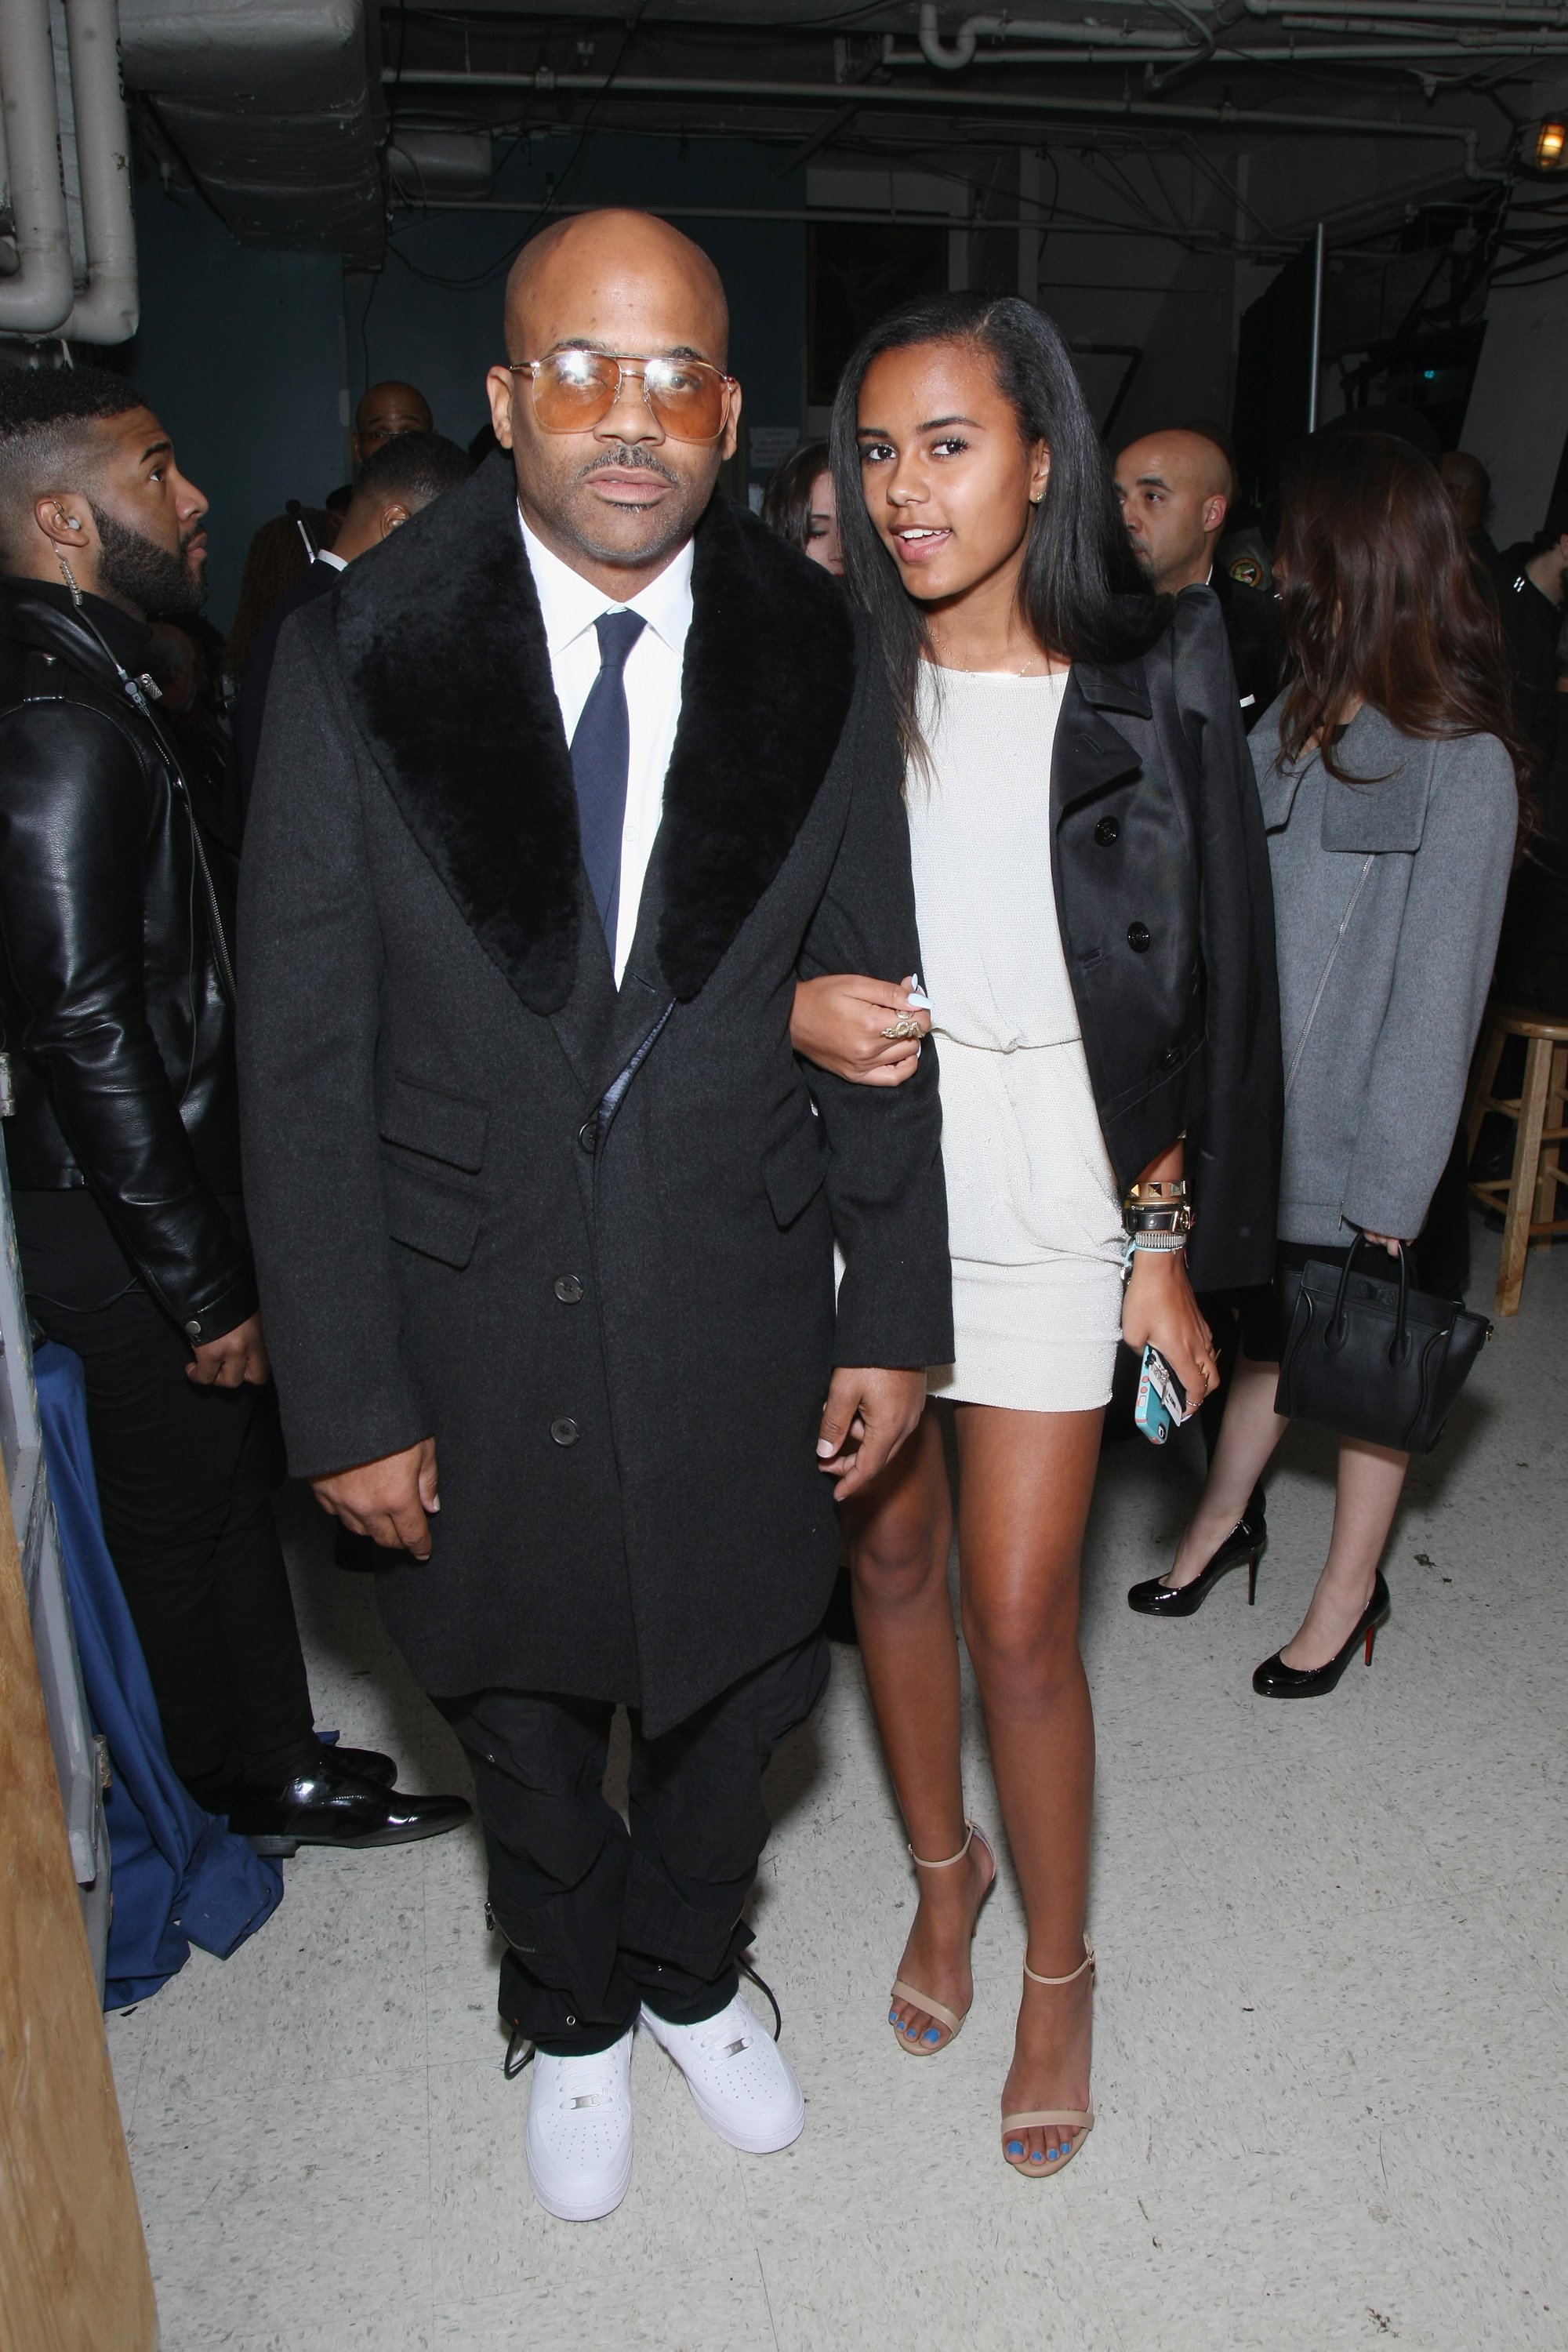 Ava and Damon Dash pose together during "The BET Honors" at Warner Theatre on January 24, 2015. | Source: Getty Images